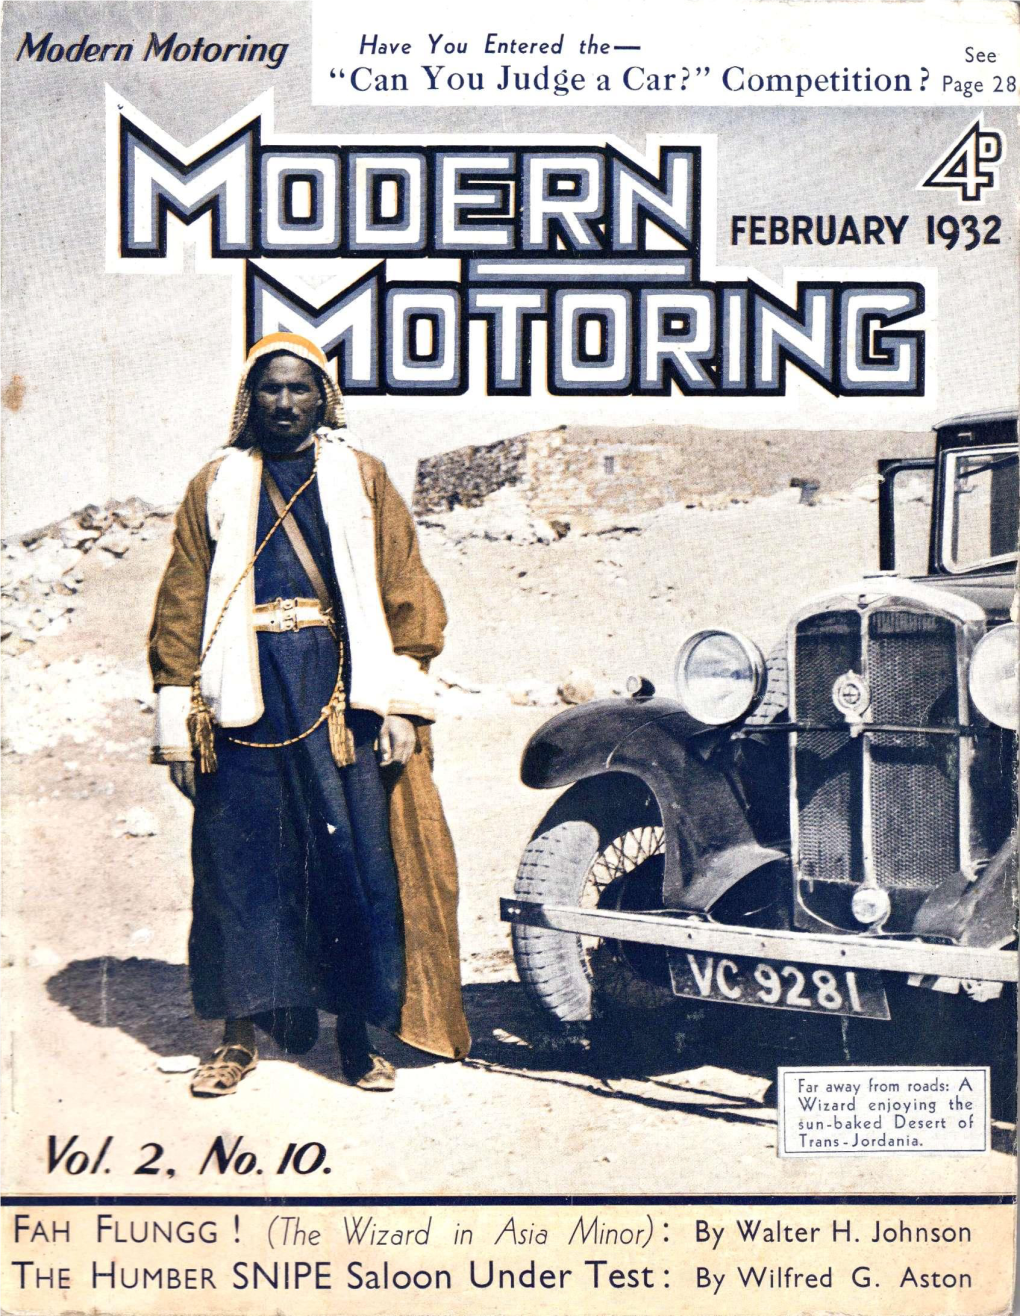 Modern Motoring Have You Entered The— See "Can You Judge a Car?" Competition? Page Is